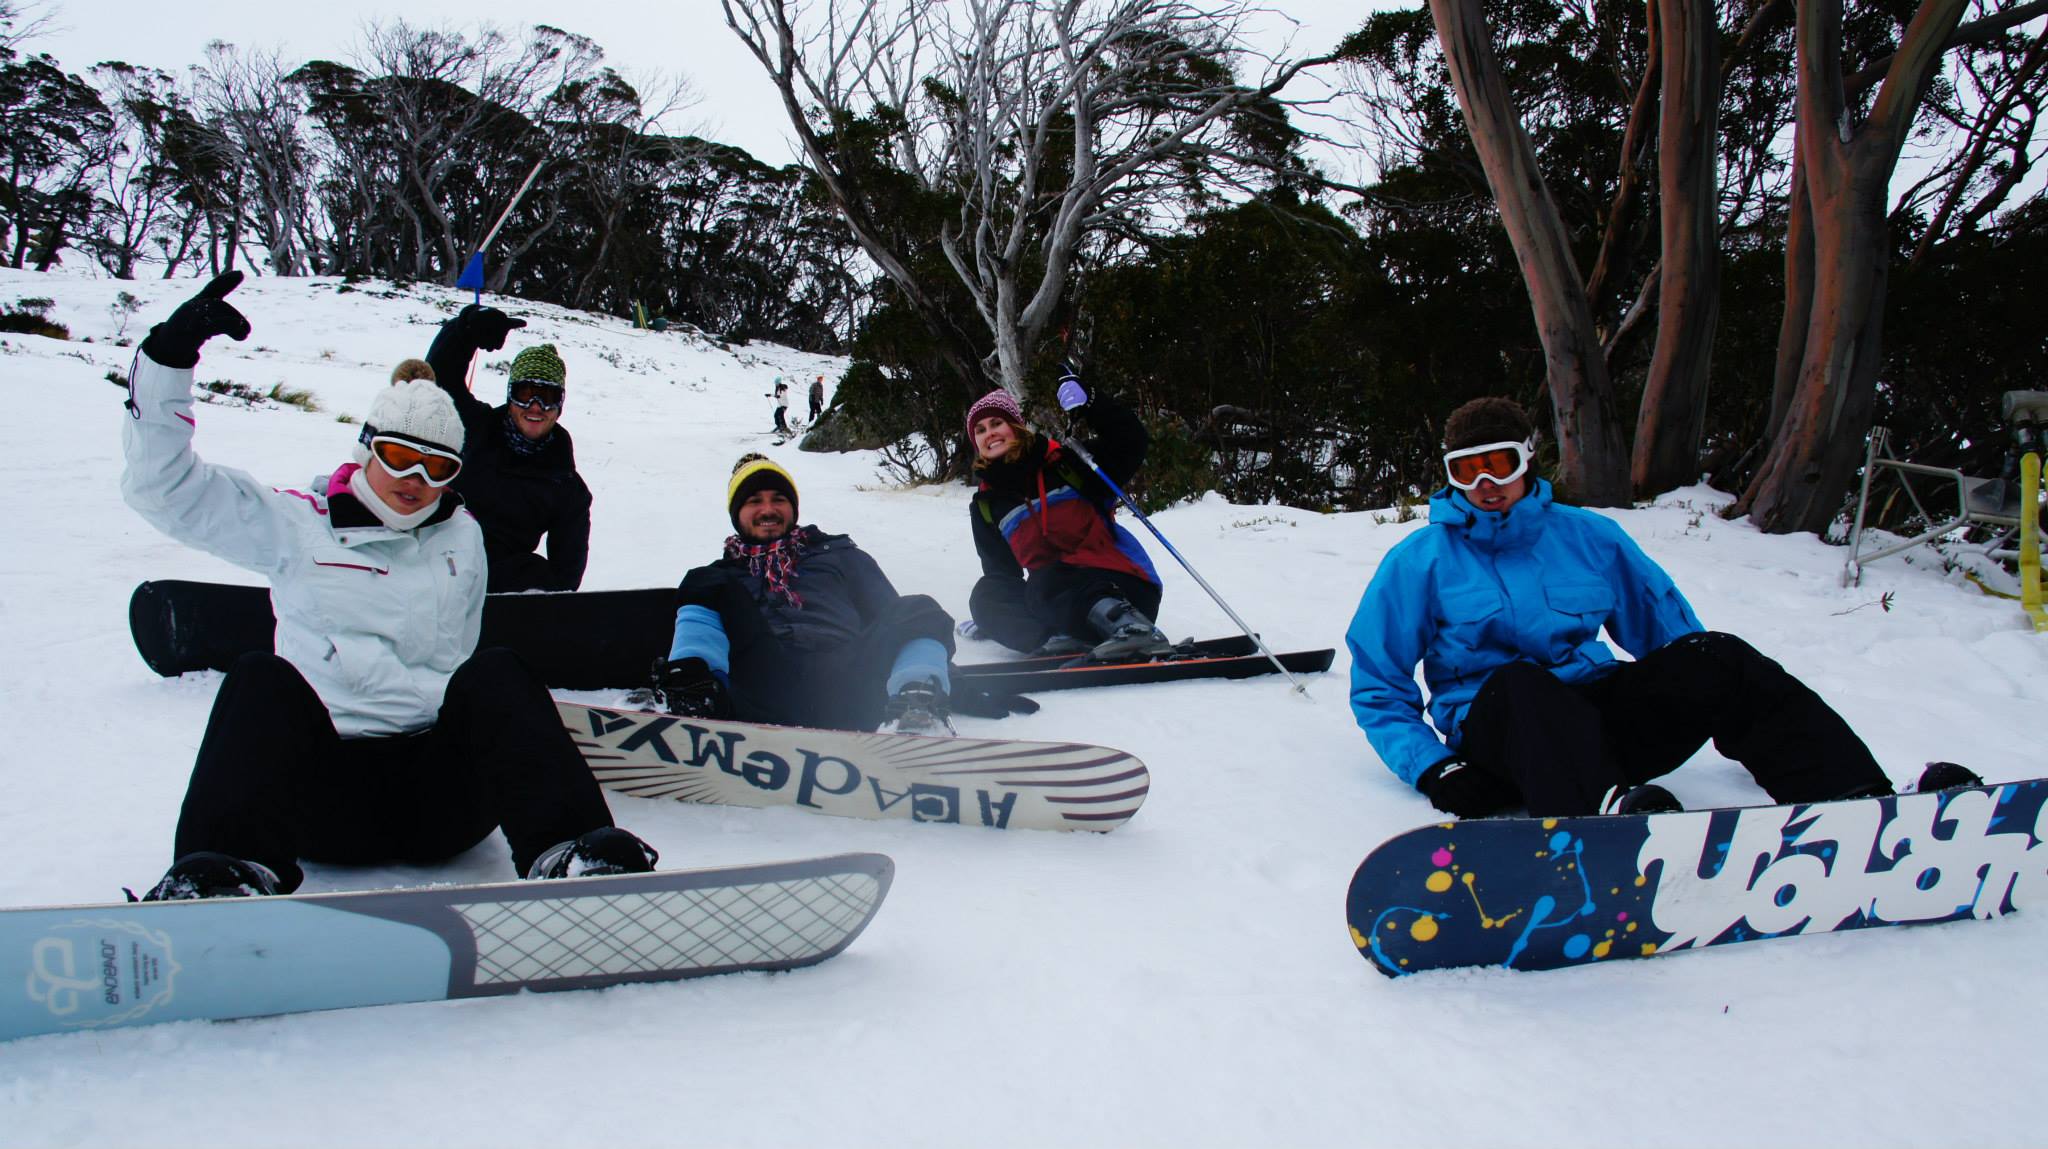 A Weekend in the Snow at Thredbo!